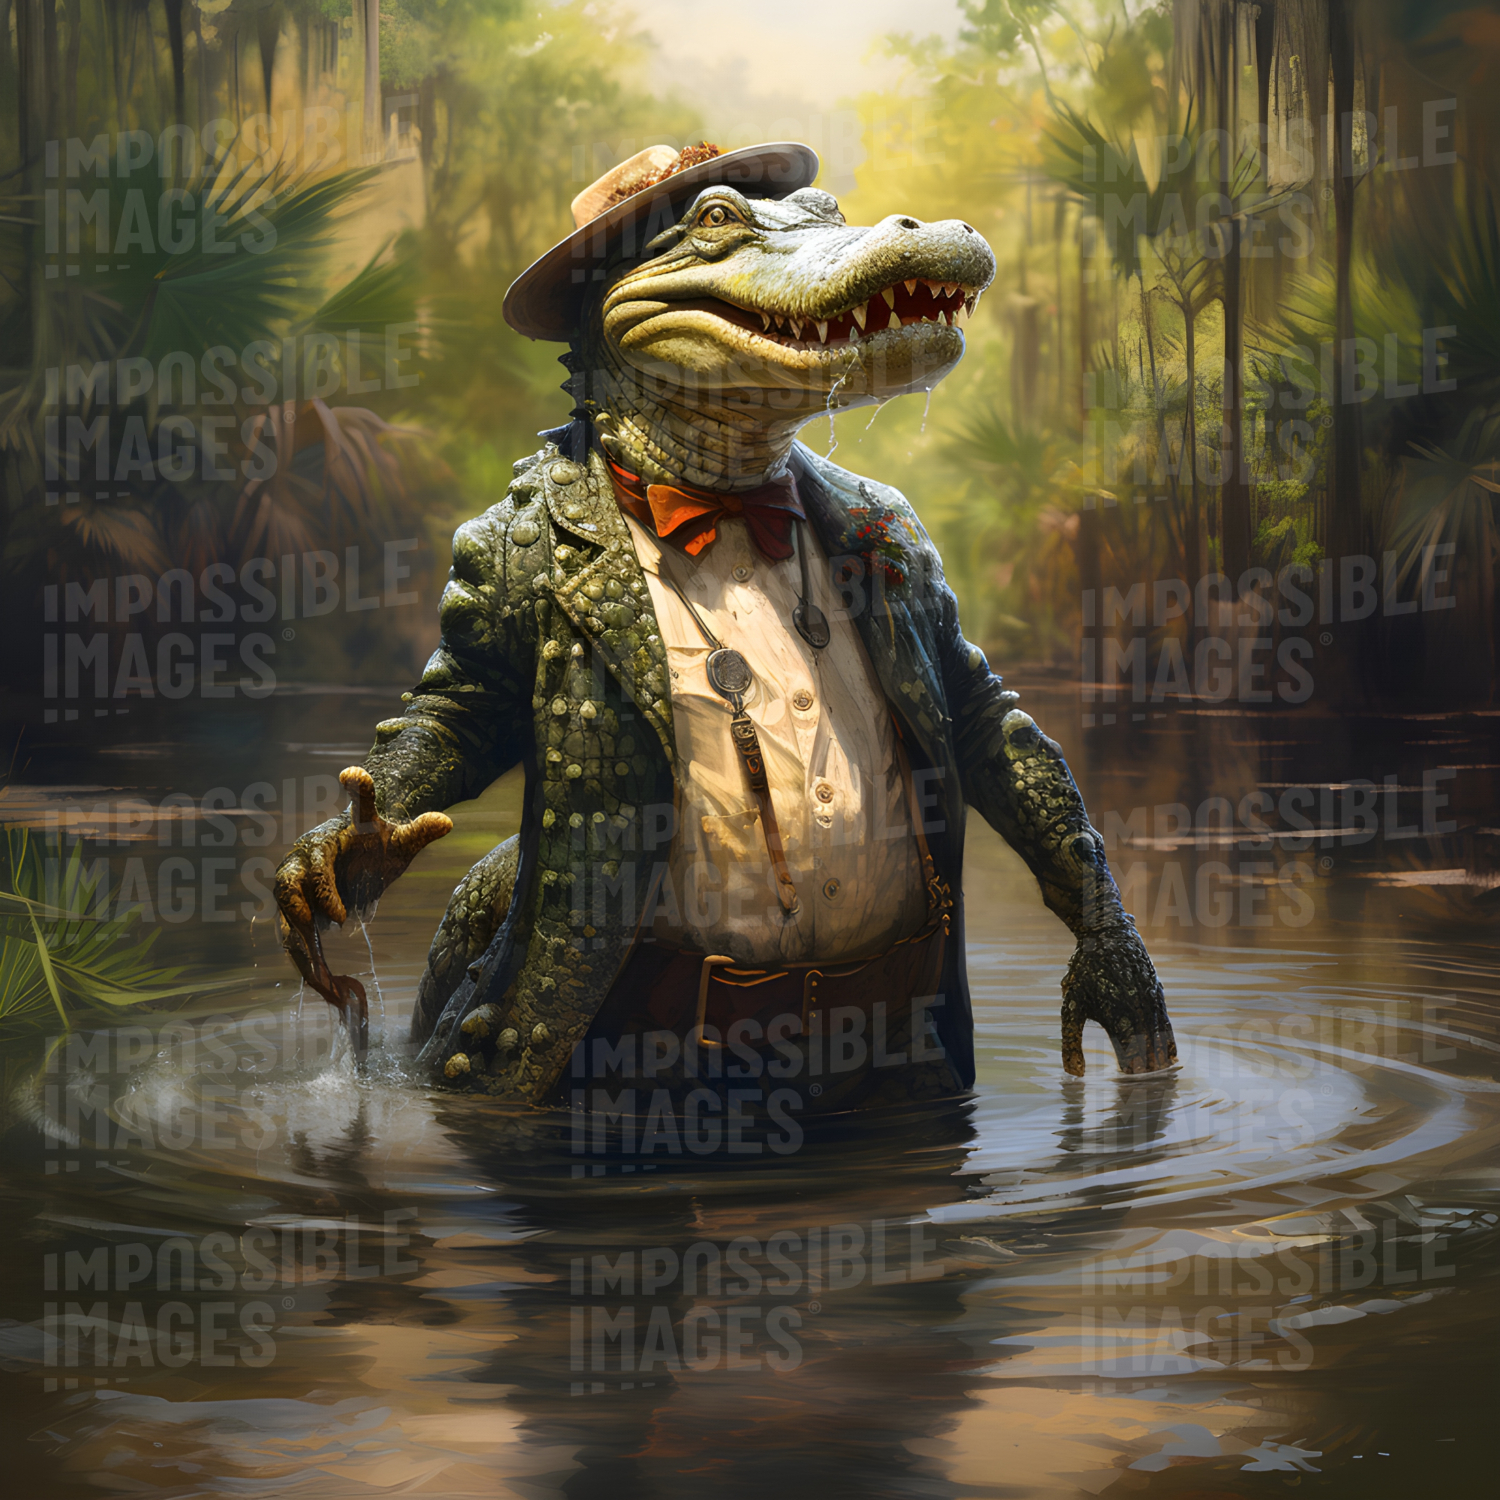 Stylishly-dressed anthropomorphic alligator wading through the bayou -  A stylishly-dressed anthropomorphic alligator wades through the murky bayou, its long tail swaying gracefully in the water.